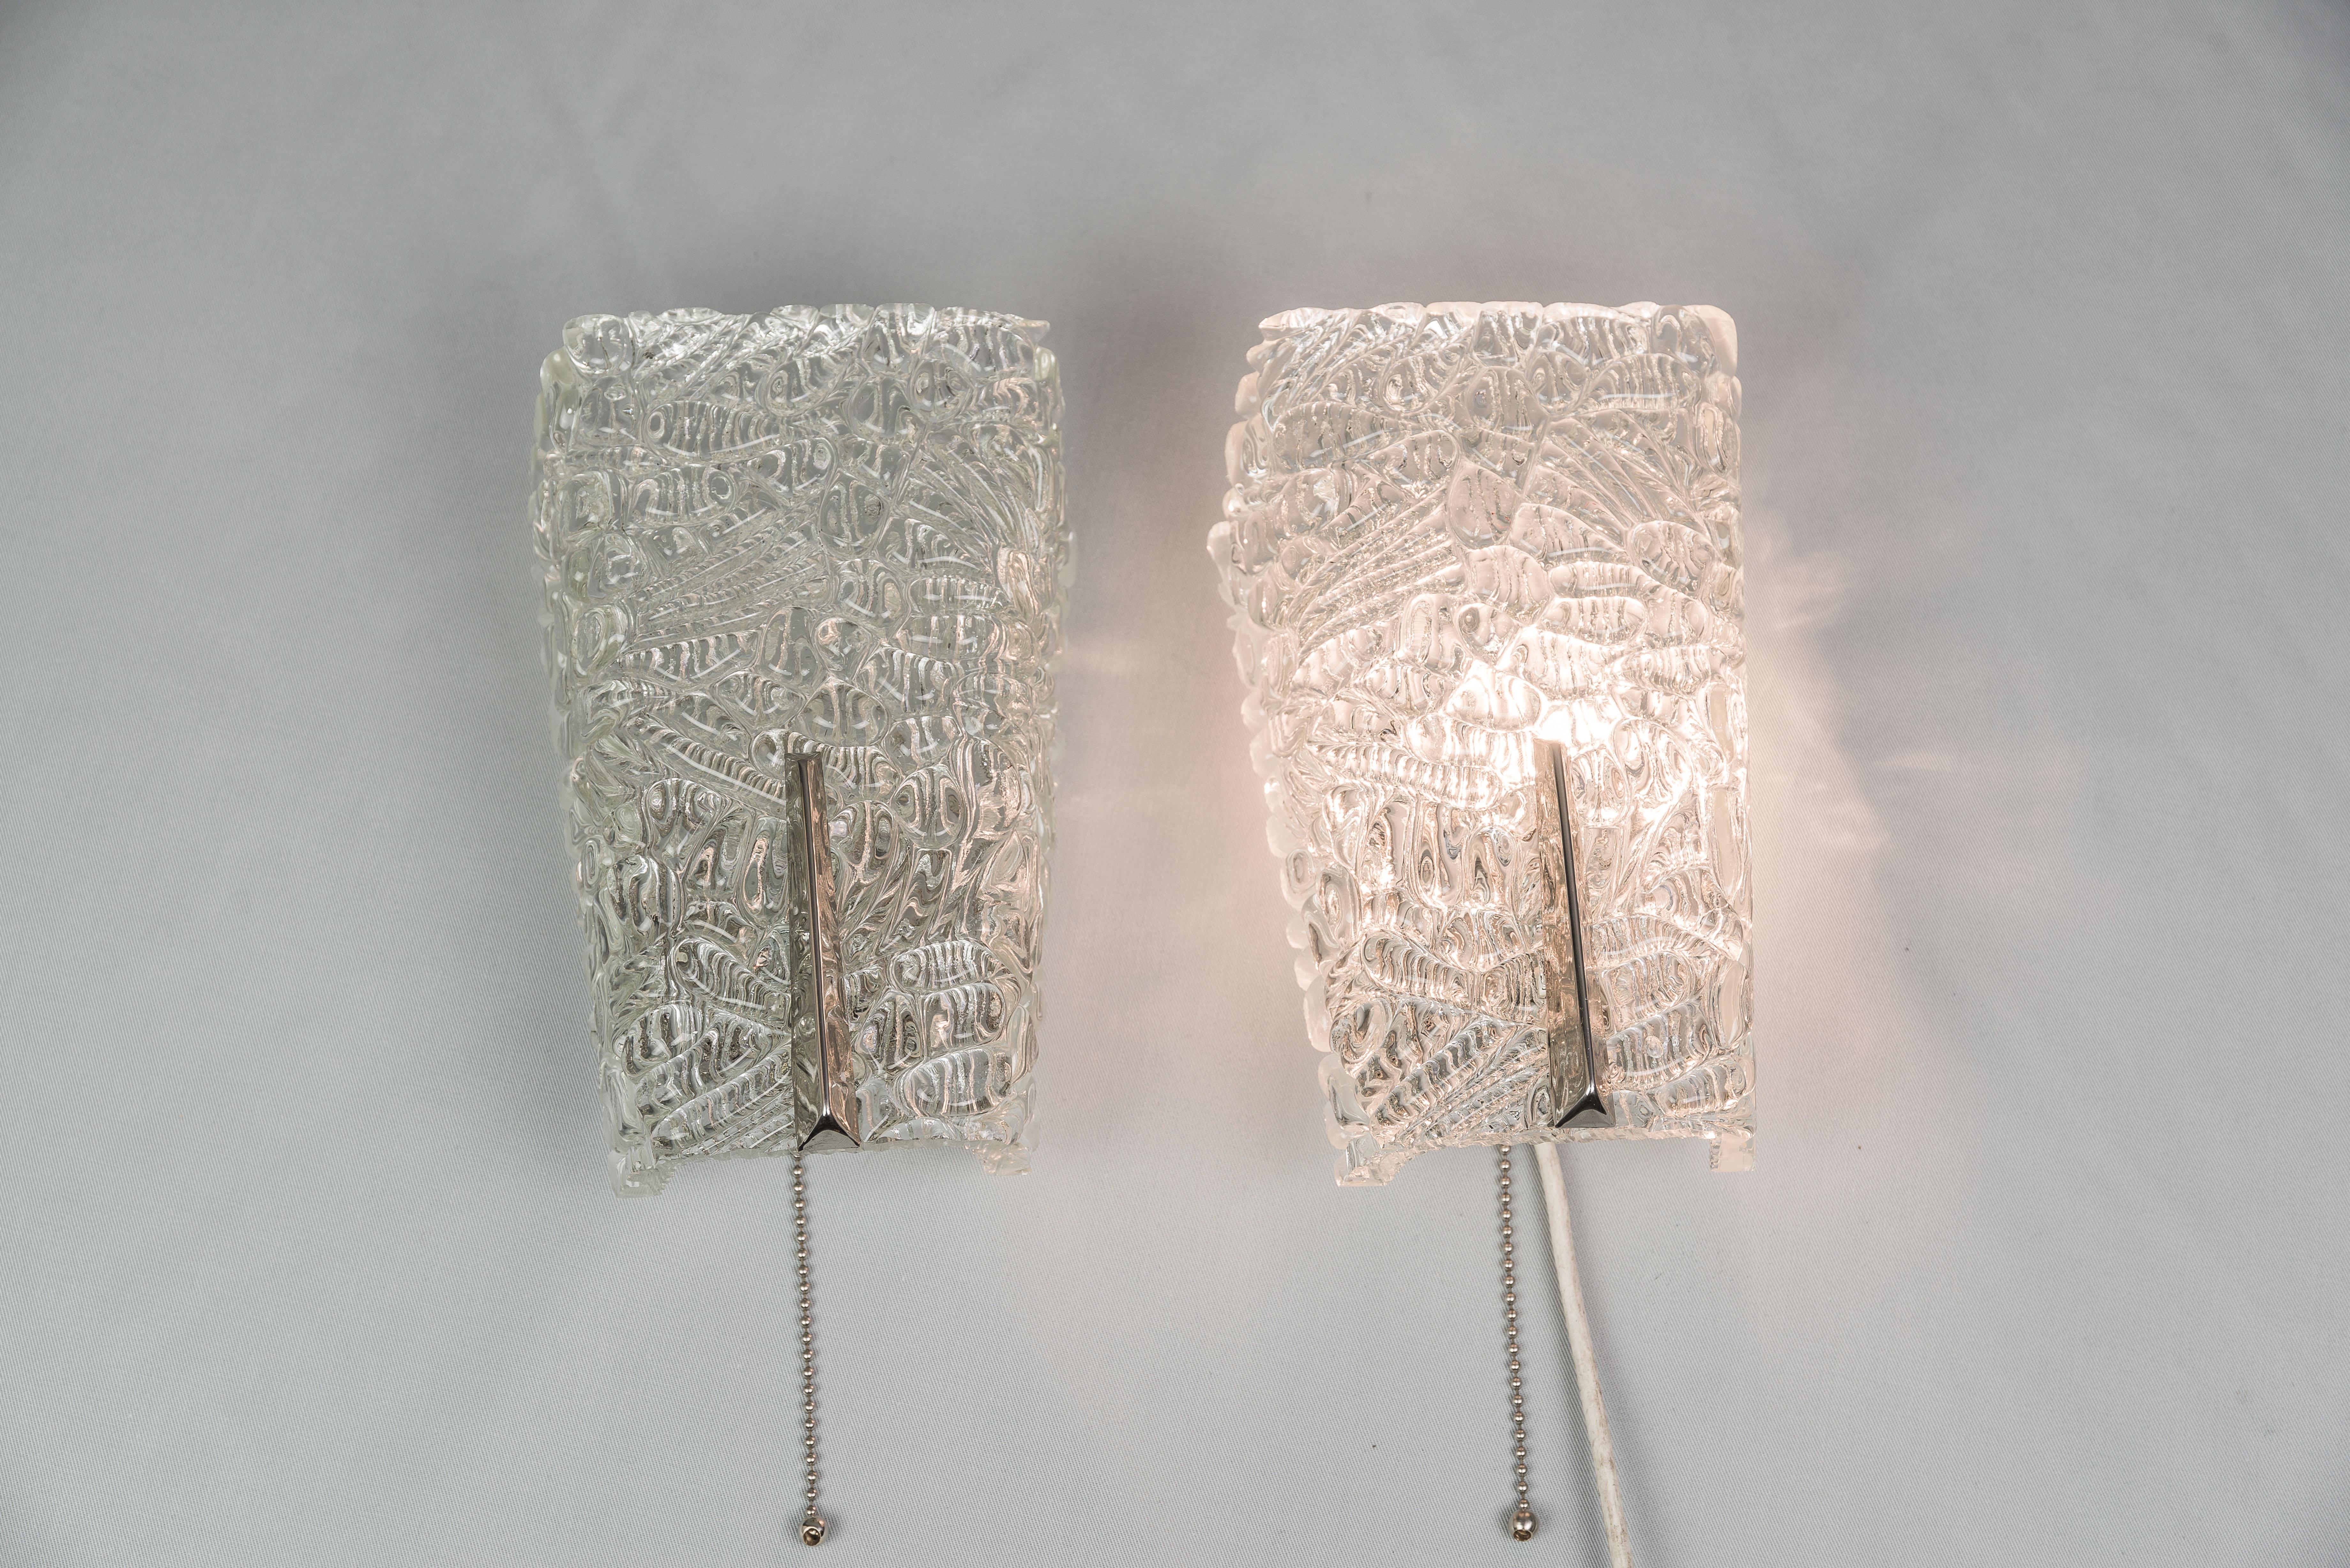 Two J.T Kalmar sconces with textured glass and nickel parts, circa 1950s
Original condition
Pair price.